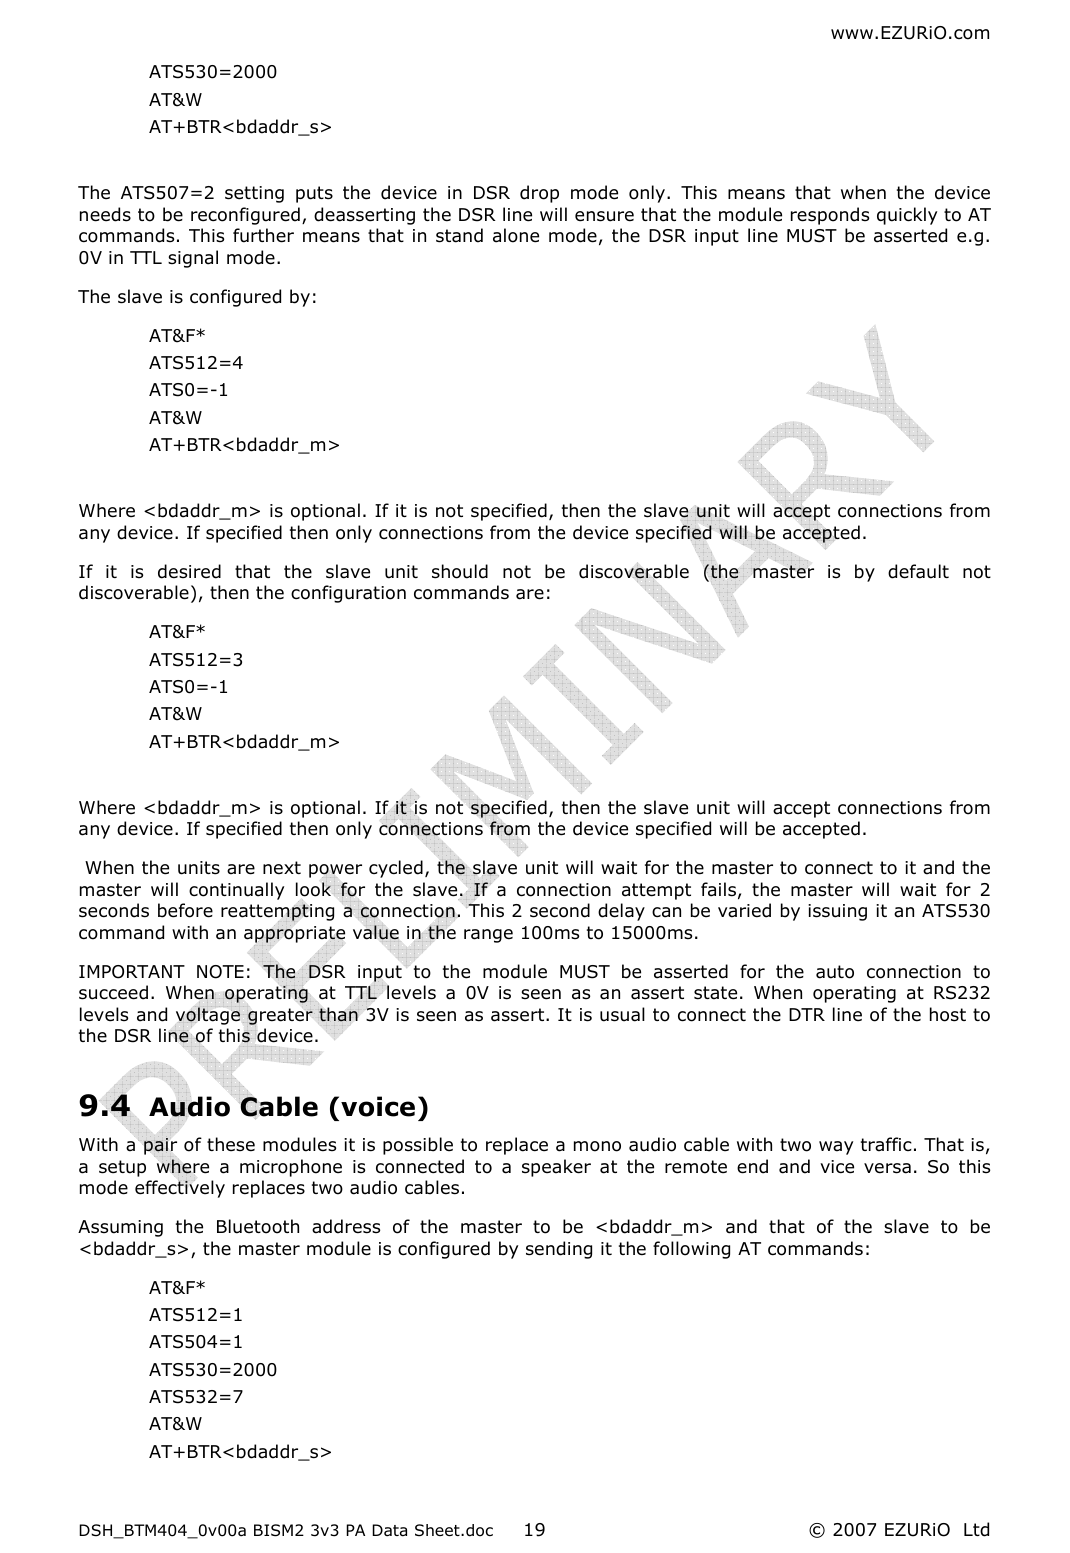 www.EZURiO.com DSH_BTM404_0v00a BISM2 3v3 PA Data Sheet.doc  © 2007 EZURiO  Ltd  19ATS530=2000 AT&amp;W AT+BTR&lt;bdaddr_s&gt;  The  ATS507=2  setting  puts  the  device  in  DSR  drop  mode  only.  This  means  that  when  the  device needs to be reconfigured, deasserting the DSR line will ensure that the module responds quickly to AT commands. This further means that in stand alone mode, the DSR input line MUST be asserted e.g. 0V in TTL signal mode. The slave is configured by: AT&amp;F* ATS512=4 ATS0=-1 AT&amp;W AT+BTR&lt;bdaddr_m&gt;  Where &lt;bdaddr_m&gt; is optional. If it is not specified, then the slave unit will accept connections from any device. If specified then only connections from the device specified will be accepted. If  it  is  desired  that  the  slave  unit  should  not  be  discoverable  (the  master  is  by  default  not discoverable), then the configuration commands are: AT&amp;F* ATS512=3 ATS0=-1 AT&amp;W AT+BTR&lt;bdaddr_m&gt;  Where &lt;bdaddr_m&gt; is optional. If it is not specified, then the slave unit will accept connections from any device. If specified then only connections from the device specified will be accepted.  When the units are next power cycled, the slave unit will wait for the master to connect to it and the master  will  continually  look  for  the  slave.  If  a  connection  attempt  fails,  the  master  will  wait  for  2 seconds before reattempting a connection. This 2 second delay can be varied by issuing it an ATS530 command with an appropriate value in the range 100ms to 15000ms. IMPORTANT  NOTE:  The  DSR  input  to  the  module  MUST  be  asserted  for  the  auto  connection  to succeed.  When  operating  at  TTL  levels  a  0V  is  seen  as  an  assert  state.  When  operating  at  RS232 levels and voltage greater than 3V is seen as assert. It is usual to connect the DTR line of the host to the DSR line of this device. 9.4 Audio Cable (voice) With a pair of these modules it is possible to replace a mono audio cable with two way traffic. That is, a  setup  where  a  microphone  is  connected  to  a  speaker  at  the  remote  end  and  vice  versa.  So  this mode effectively replaces two audio cables. Assuming  the  Bluetooth  address  of  the  master  to  be  &lt;bdaddr_m&gt;  and  that  of  the  slave  to  be &lt;bdaddr_s&gt;, the master module is configured by sending it the following AT commands: AT&amp;F* ATS512=1 ATS504=1 ATS530=2000 ATS532=7 AT&amp;W AT+BTR&lt;bdaddr_s&gt; 